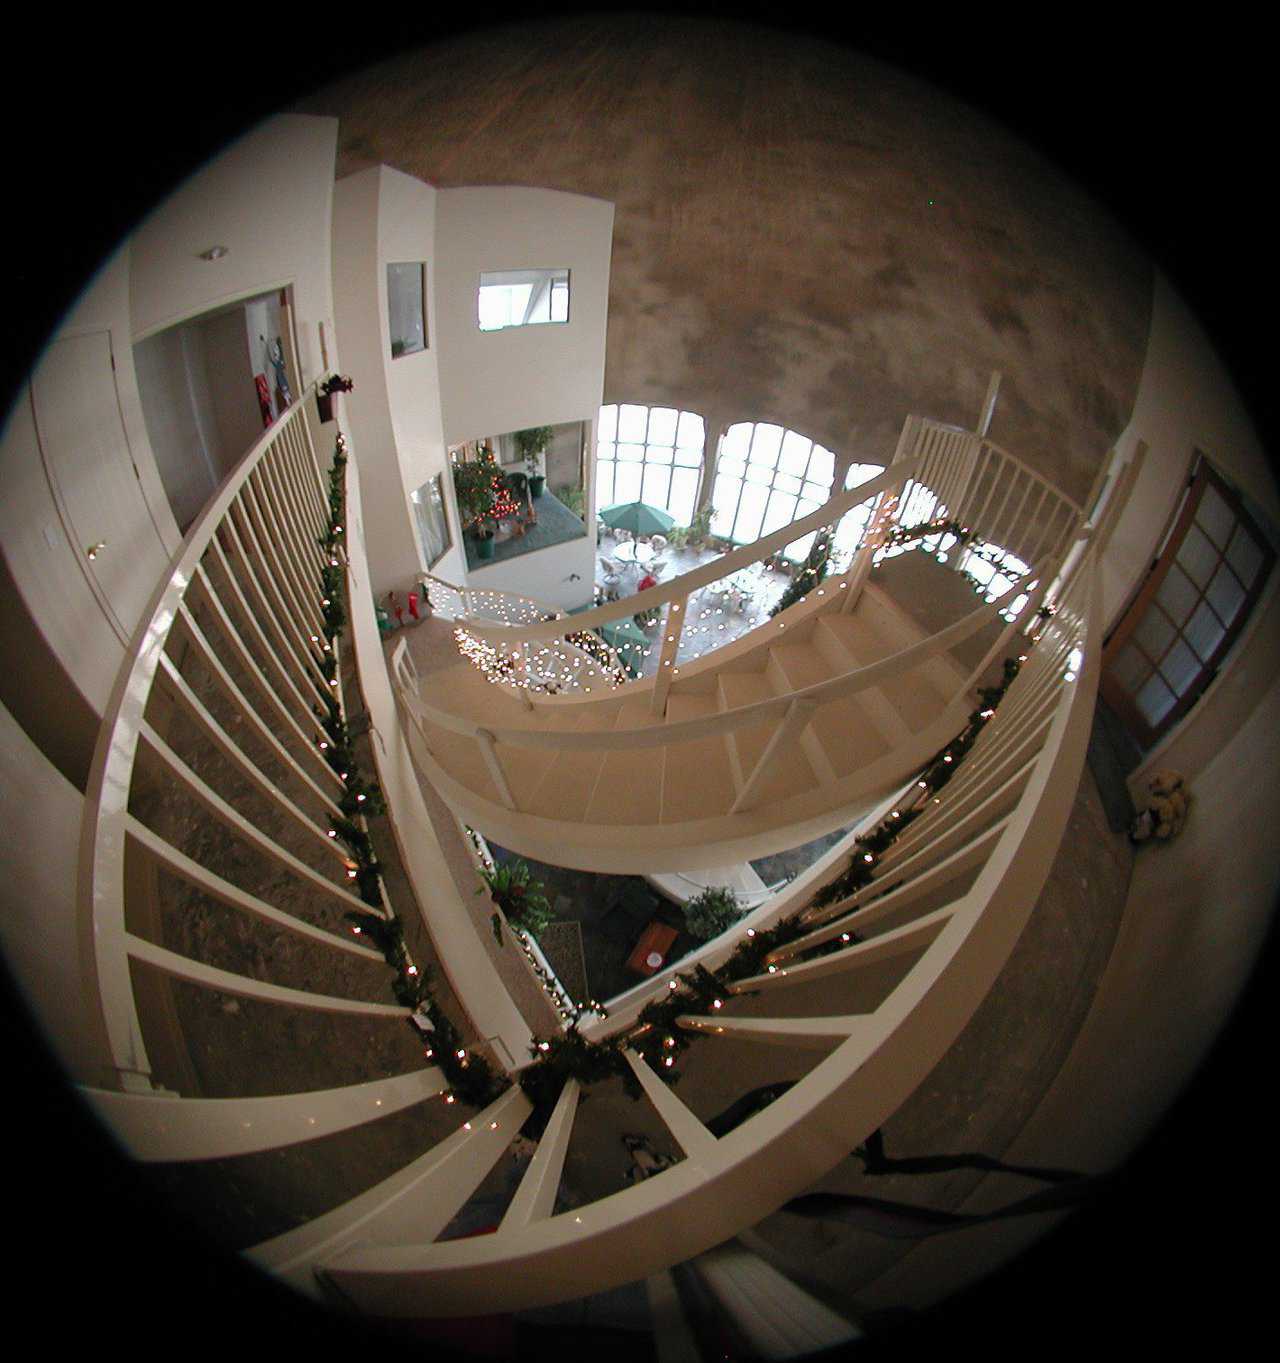 Deck the halls — View from the top using another “fish-eye” lens. Christmas lights and decorations adorn the staircase.